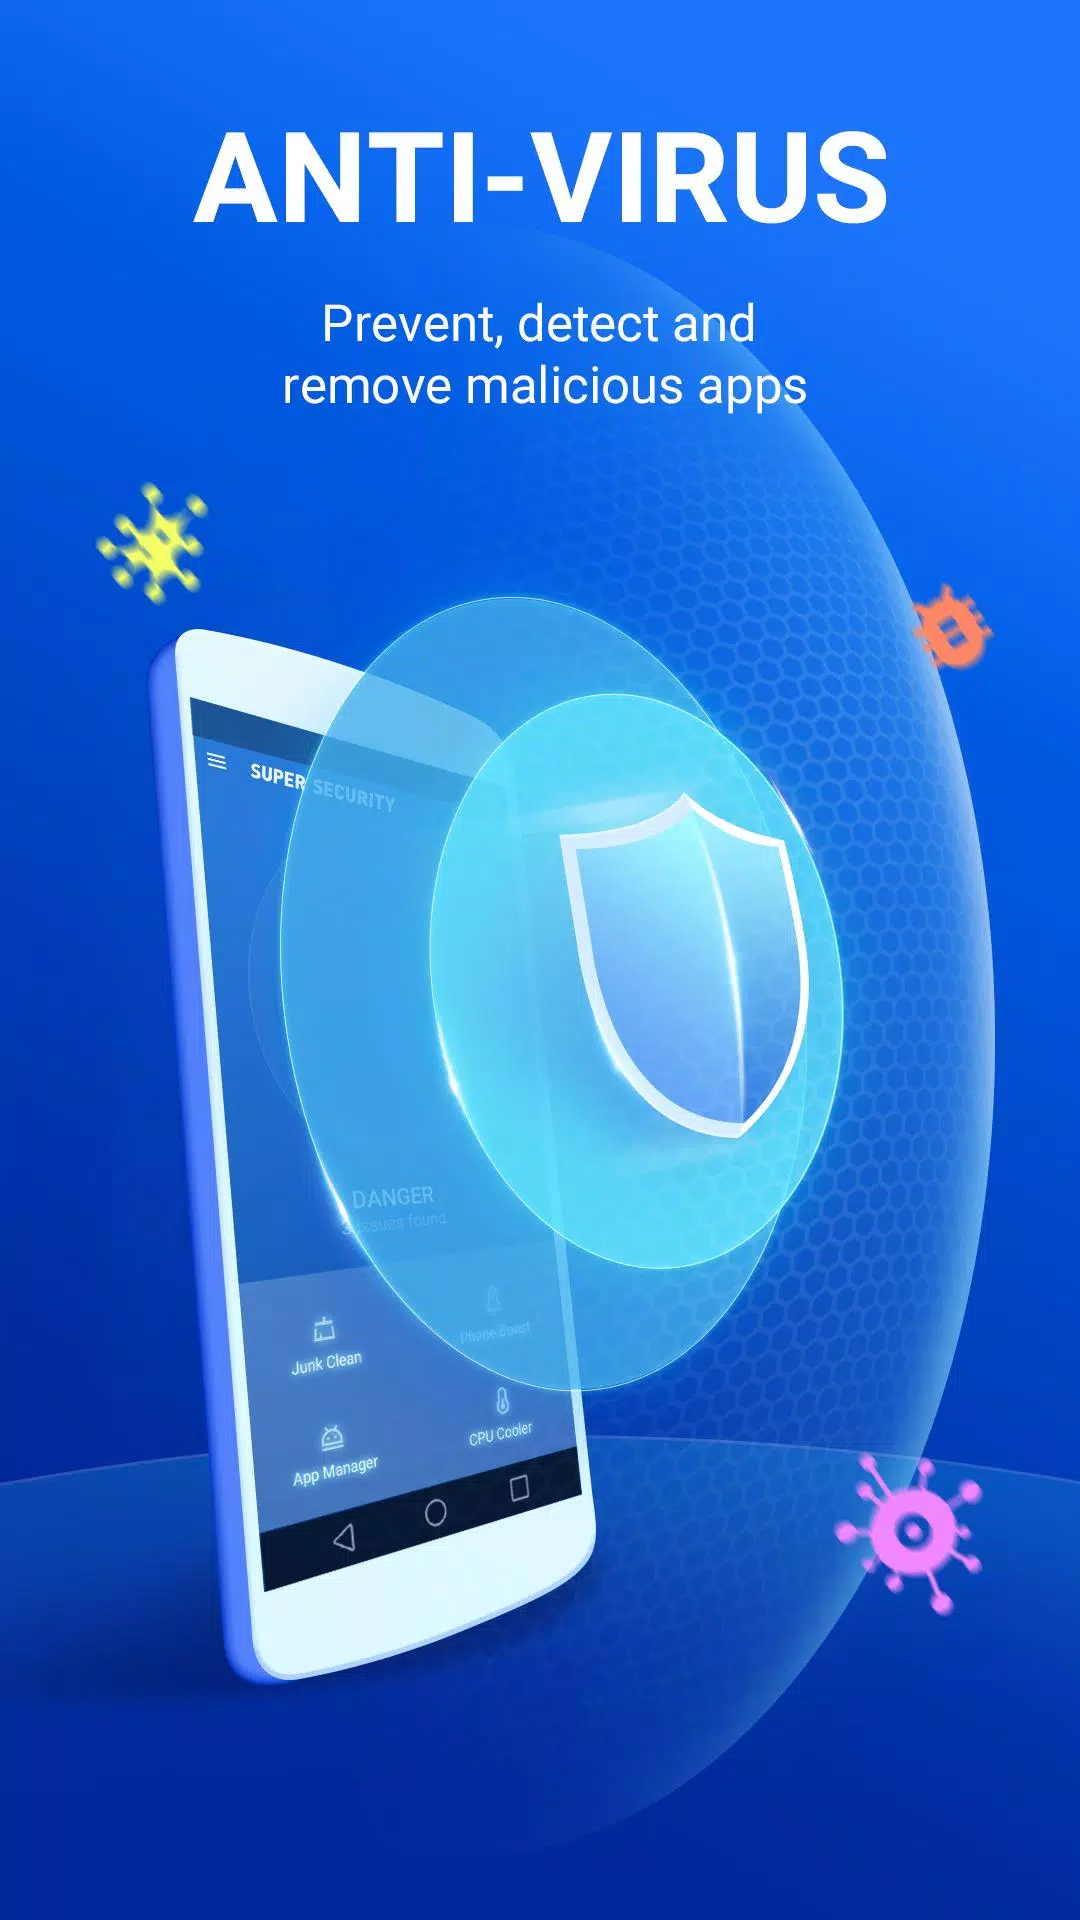 Antivirus - Virus Scanner & Remover for Android - APK Download